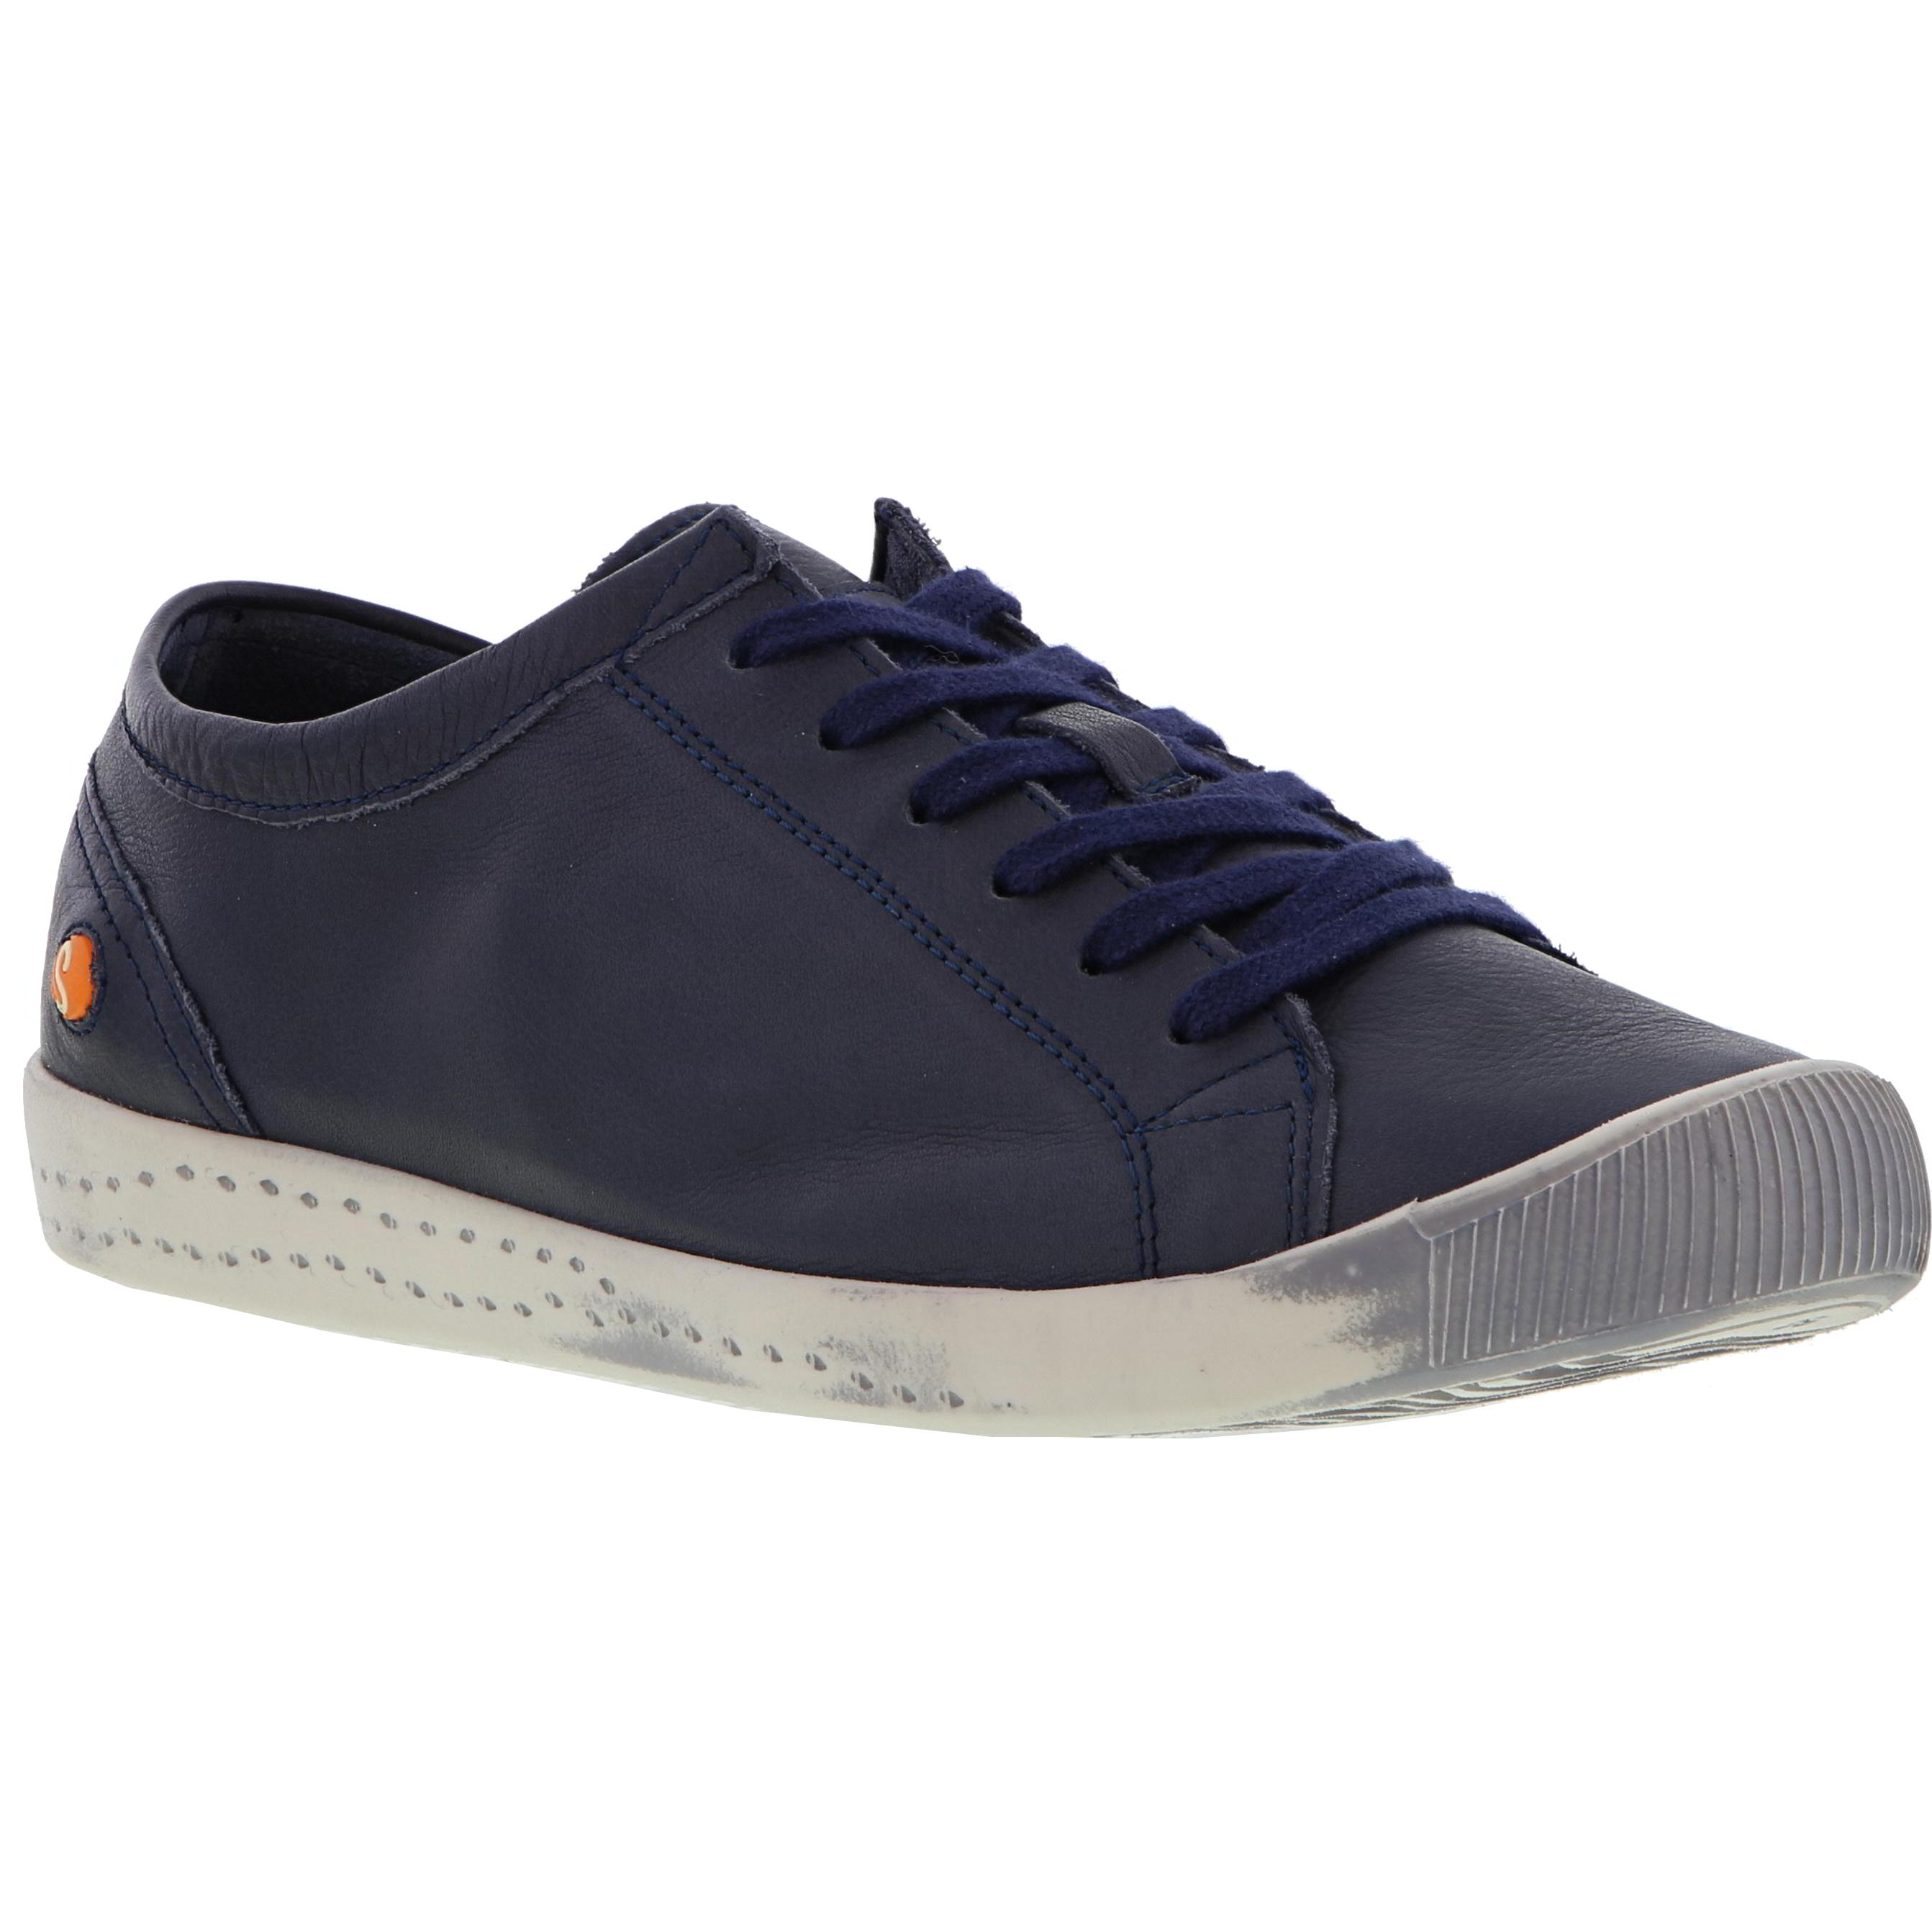 Softinos by Fly London Women's Isla Leather Trainers Shoes - Navy Smooth - UK 6 / EU 39